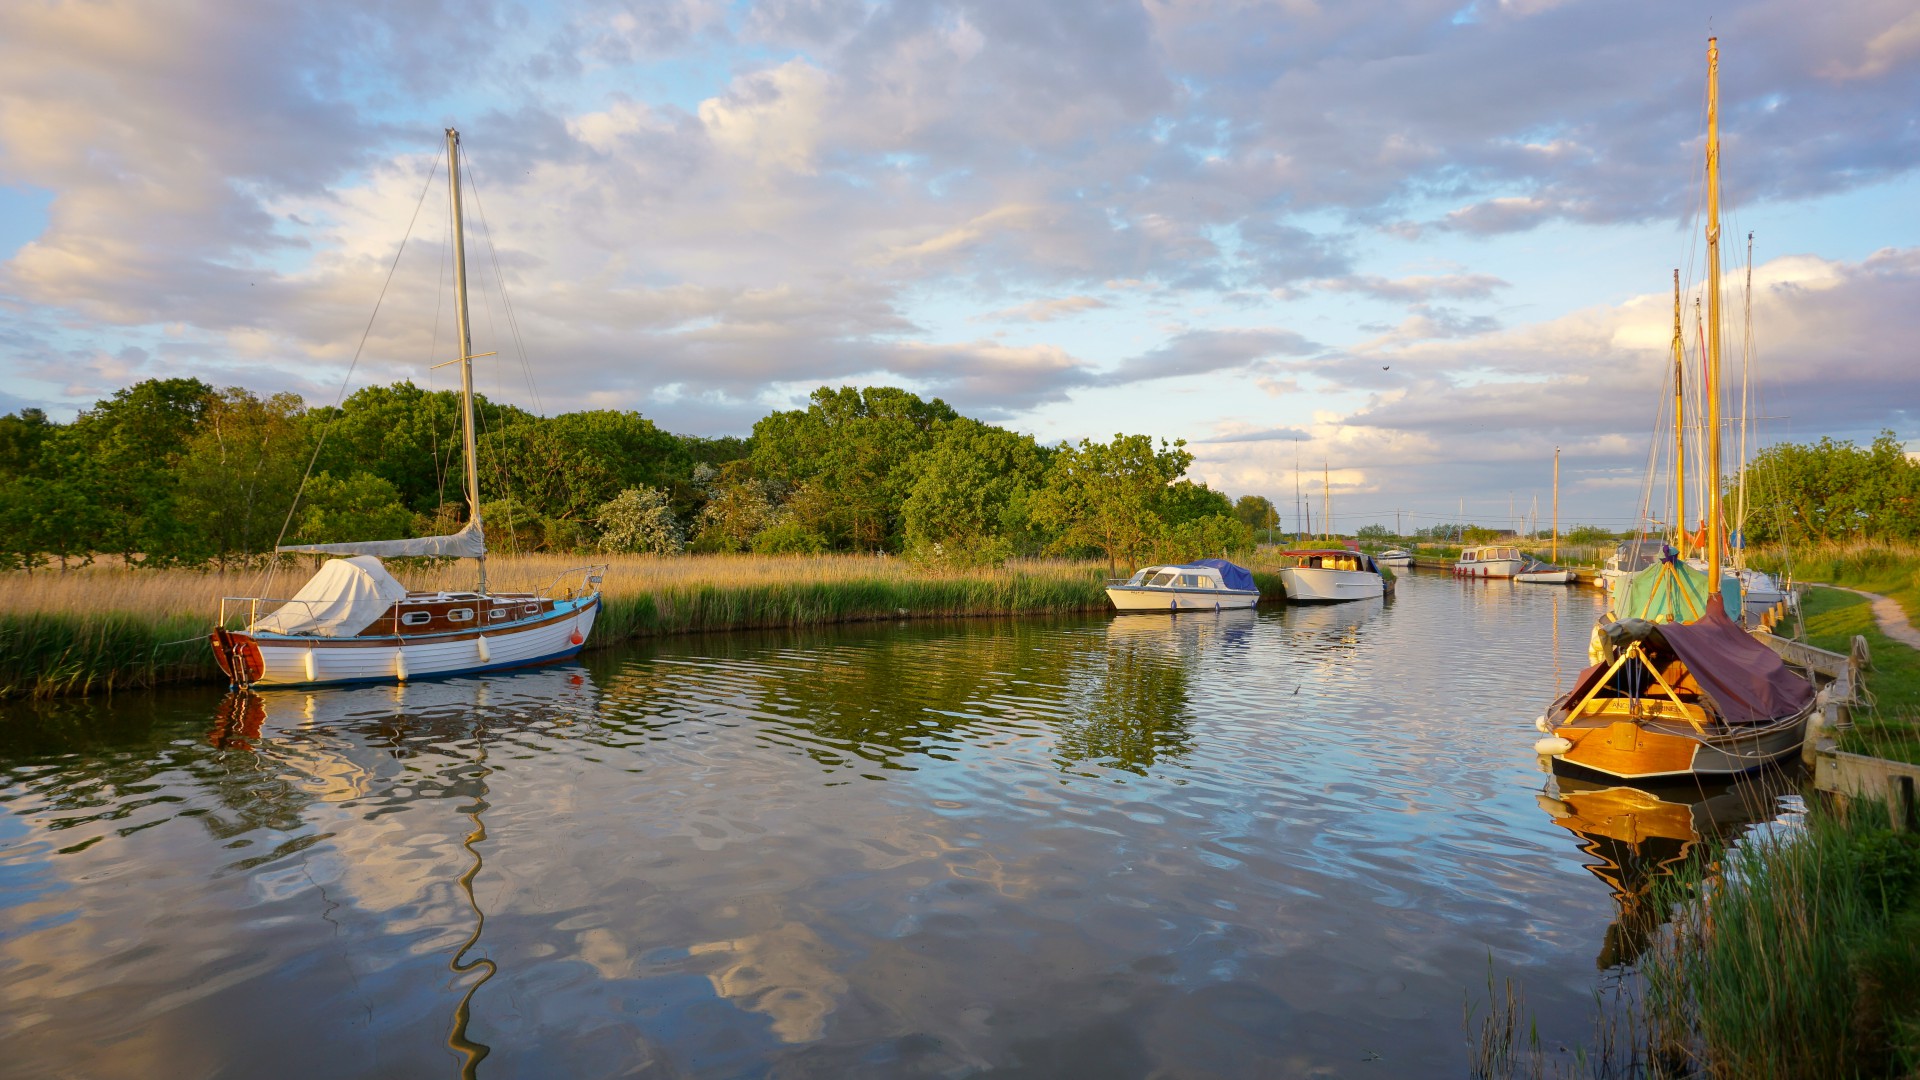 The Broads National Park